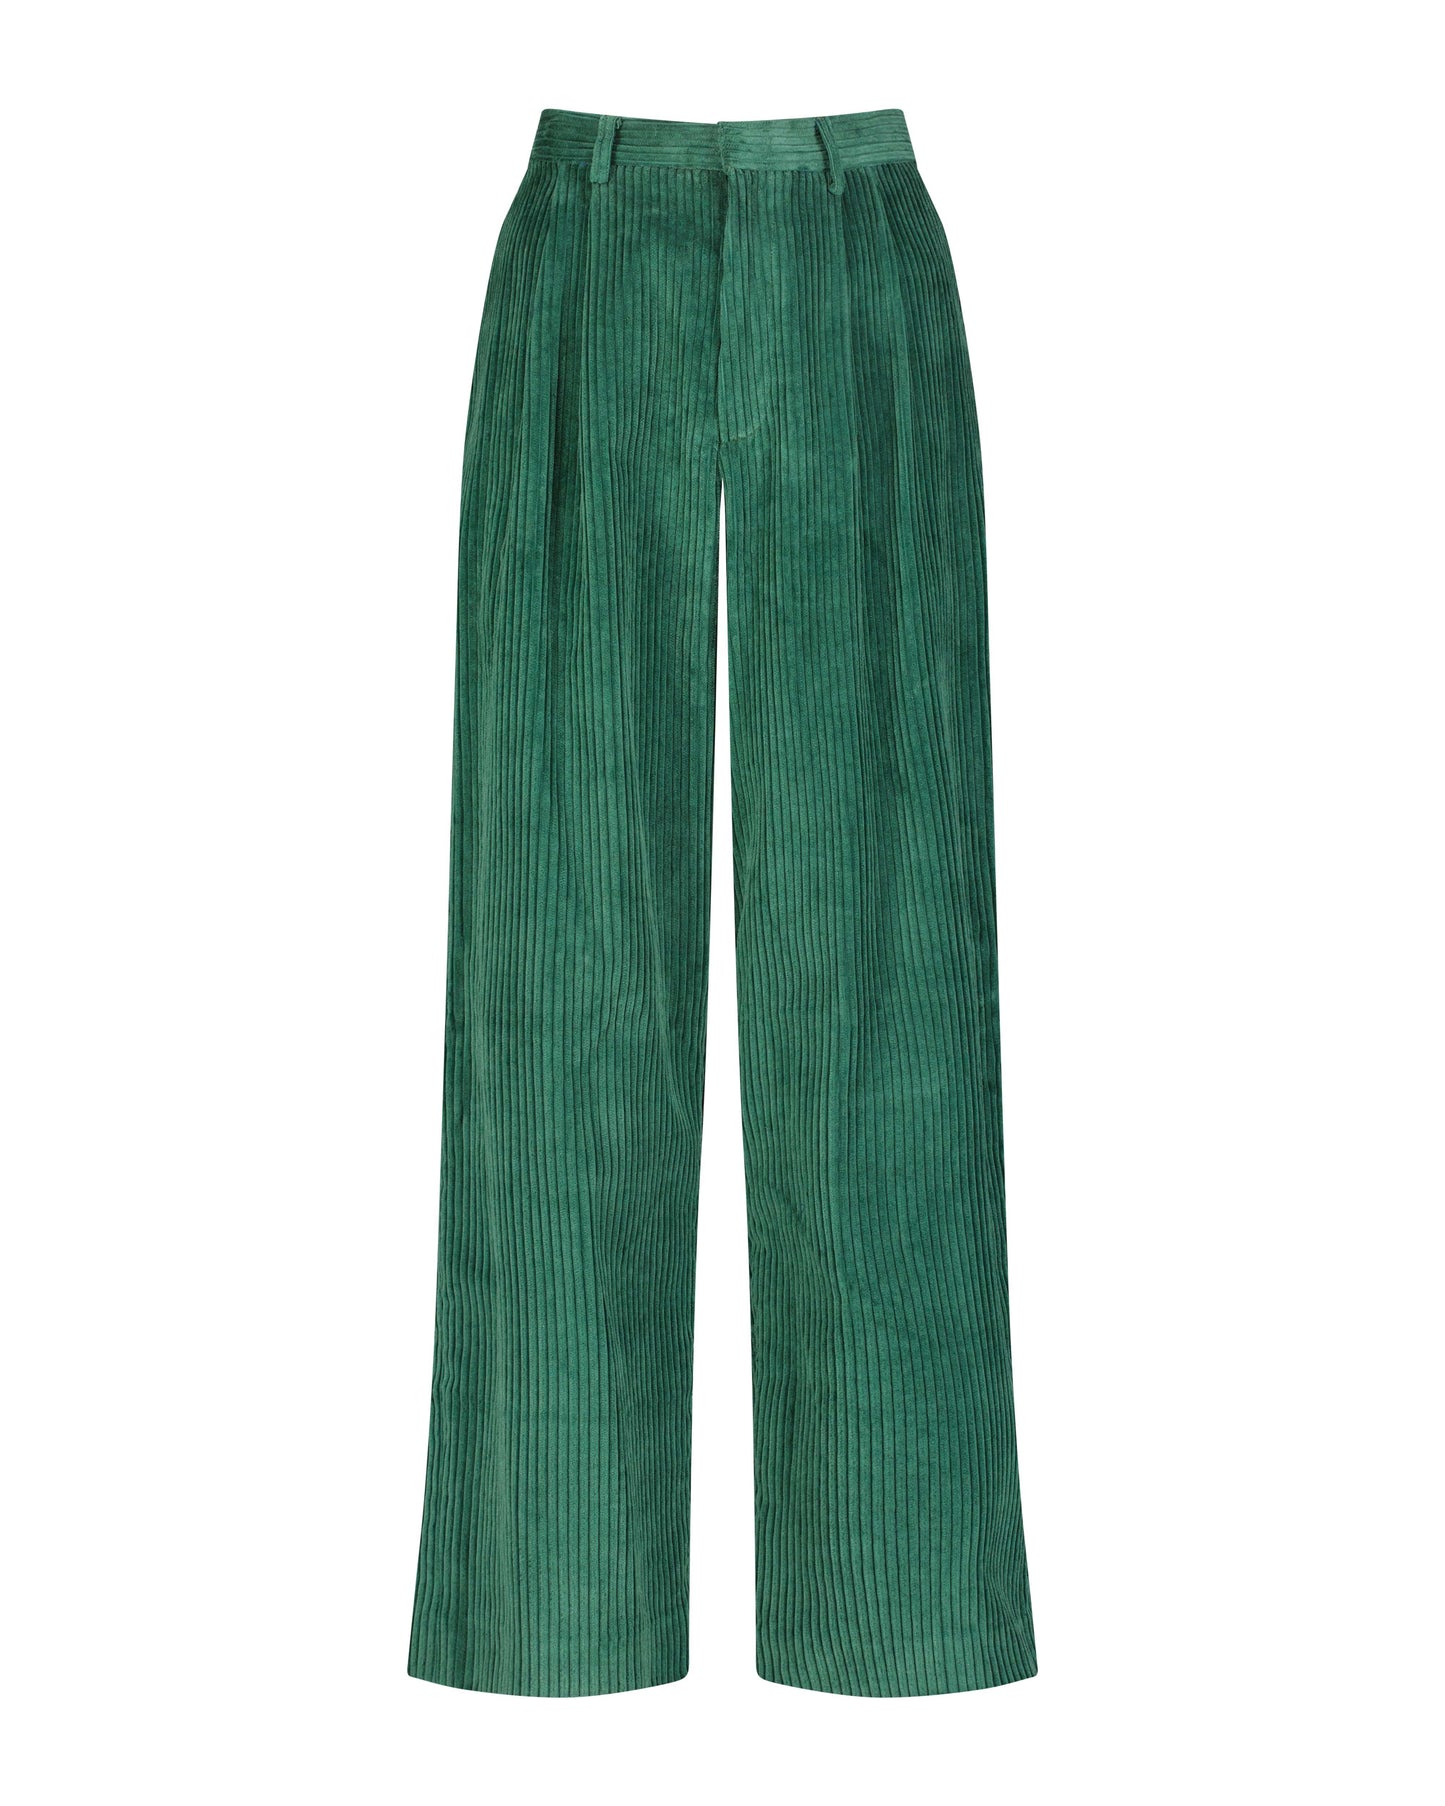 Charlize Pant in Corduroy - Navy Pants CHRISTINE ALCALAY   